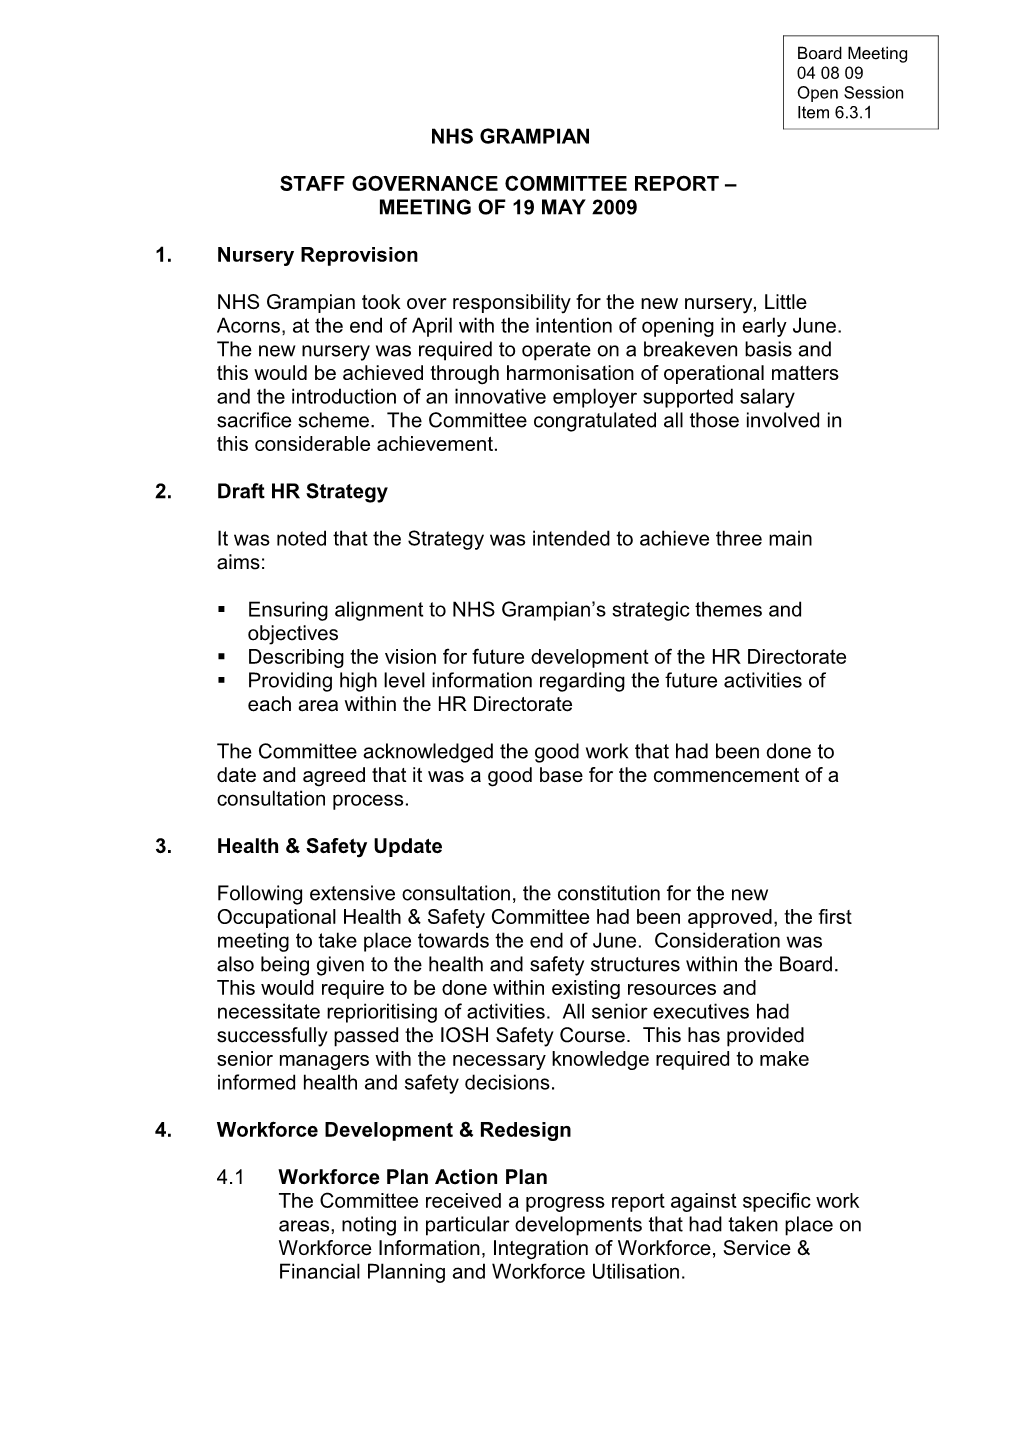 Item 6.3.1 for 4 Aug 09 Staff Governance Committee Report